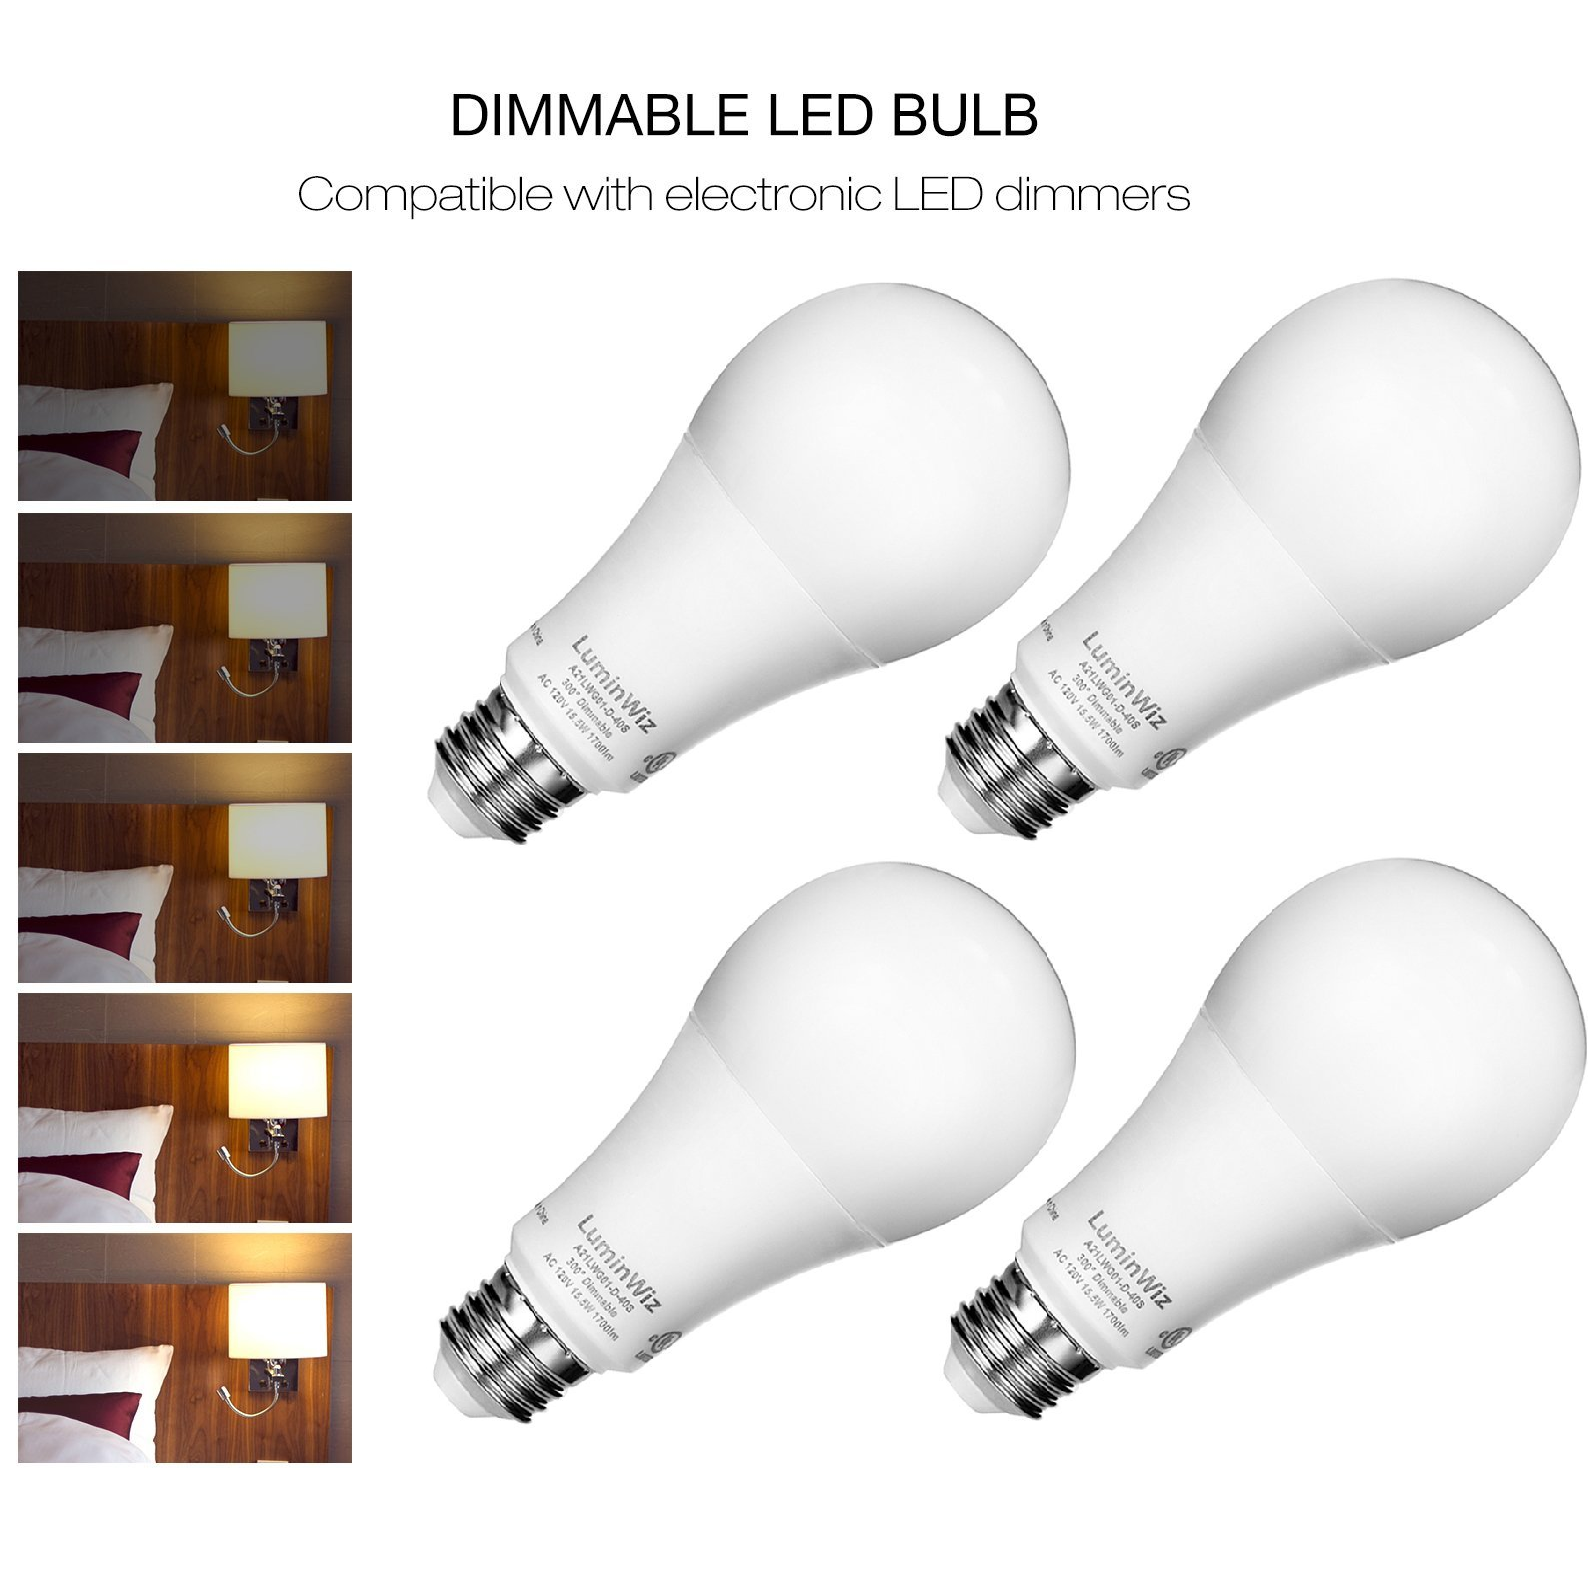 Dimmable LED Light Bulbs 4 Pack Only $24.99 on Amazon!